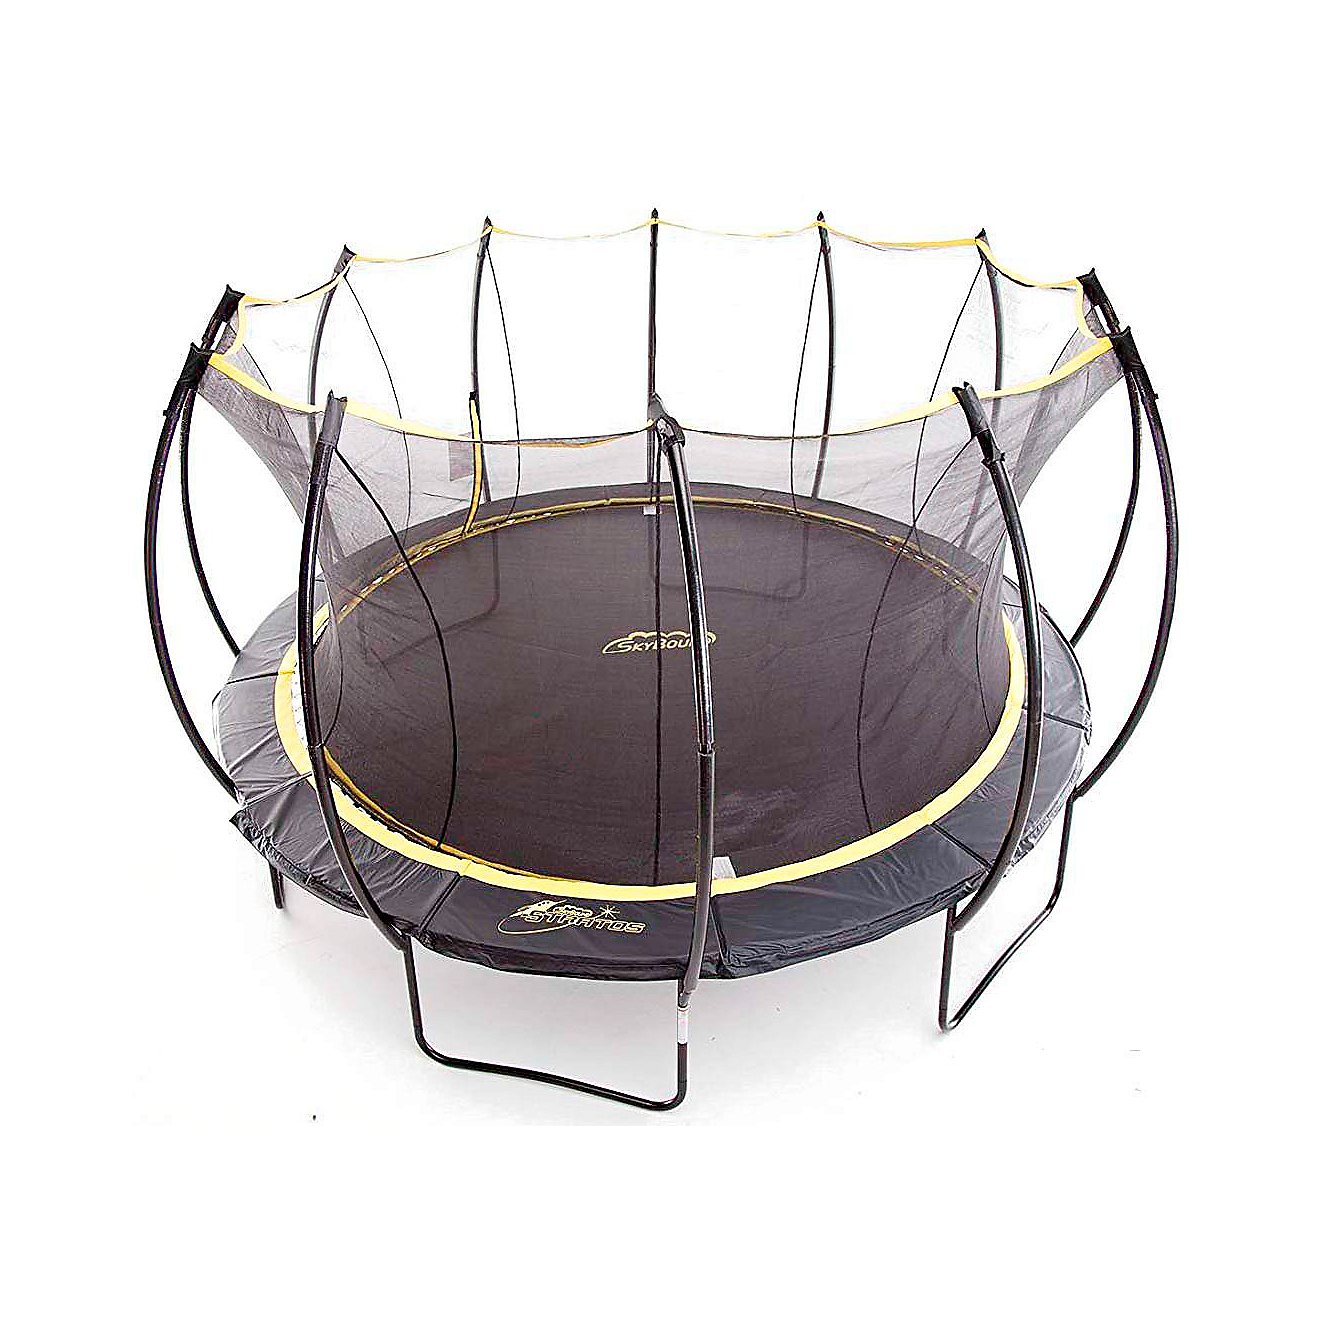 SkyBound Stratos 12 ft Round Trampoline with Full Safety Net Enclosure System                                                    - view number 1